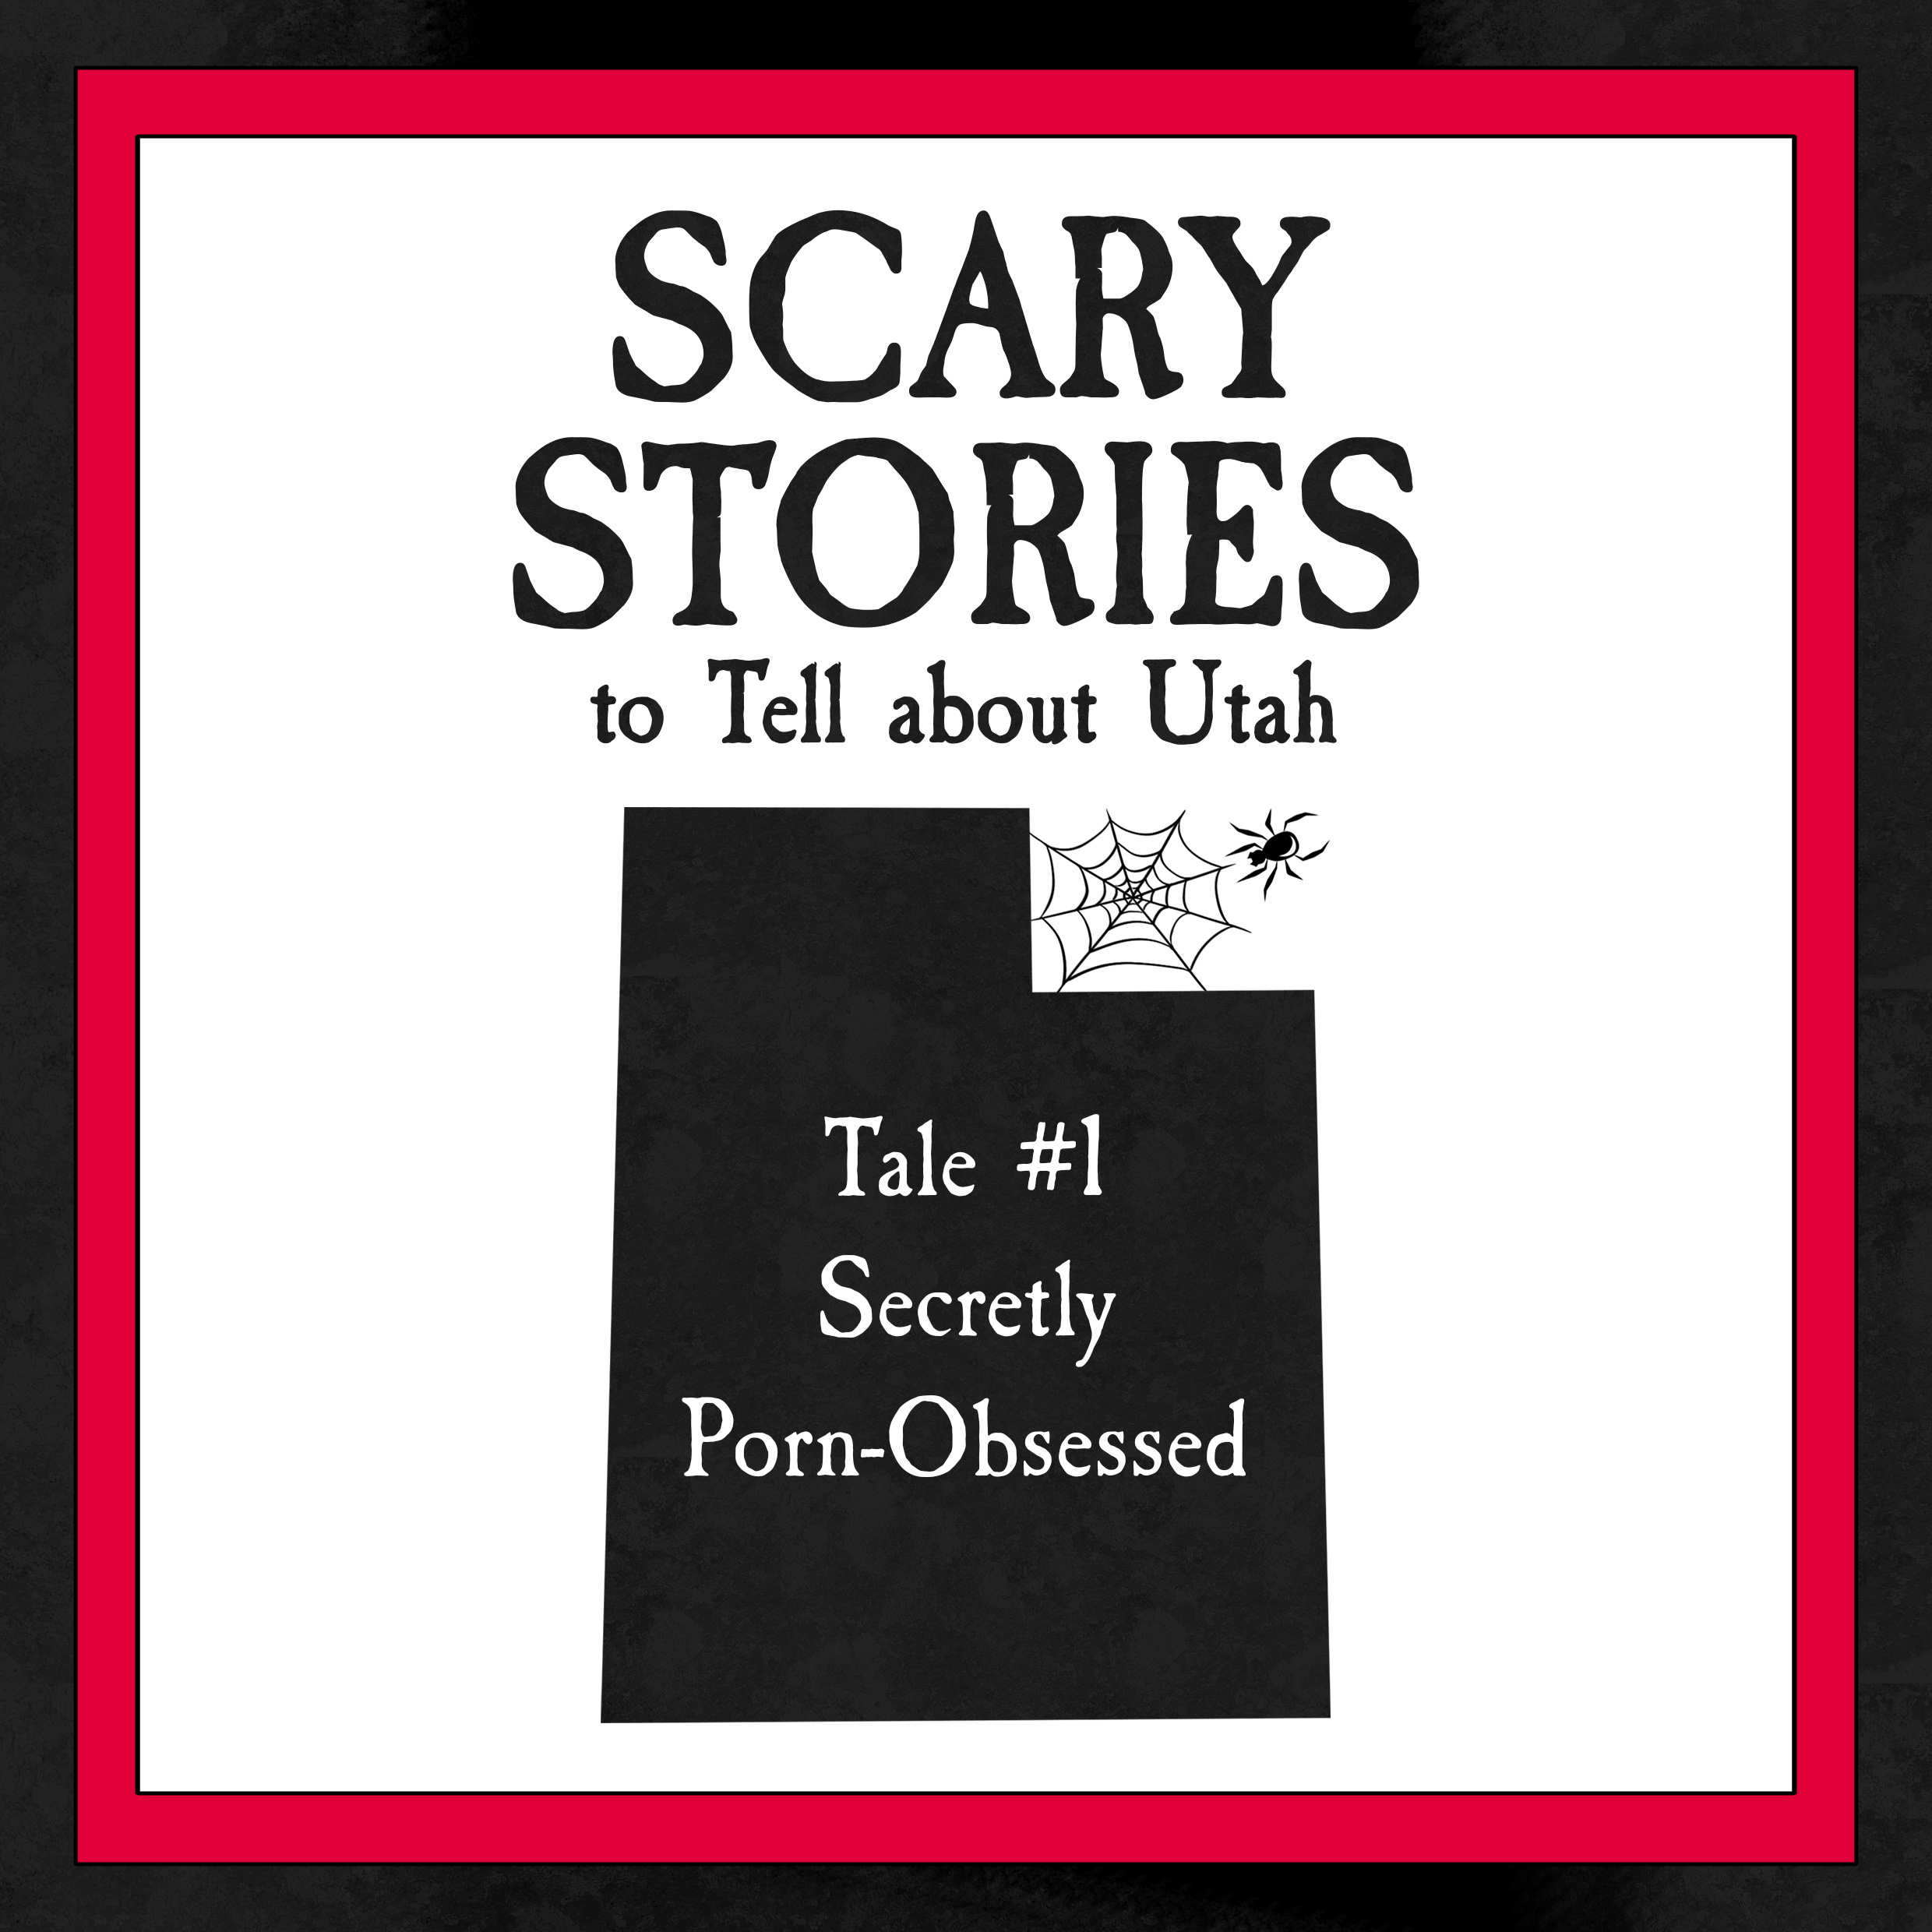 Red, White & Black 'Stories to Tell about Utah' Graphic Resembling 'Scary Stories' Books | Are Utahns Uniquely Drawn to Pornography? | Public Square Magazine | Utah Porn